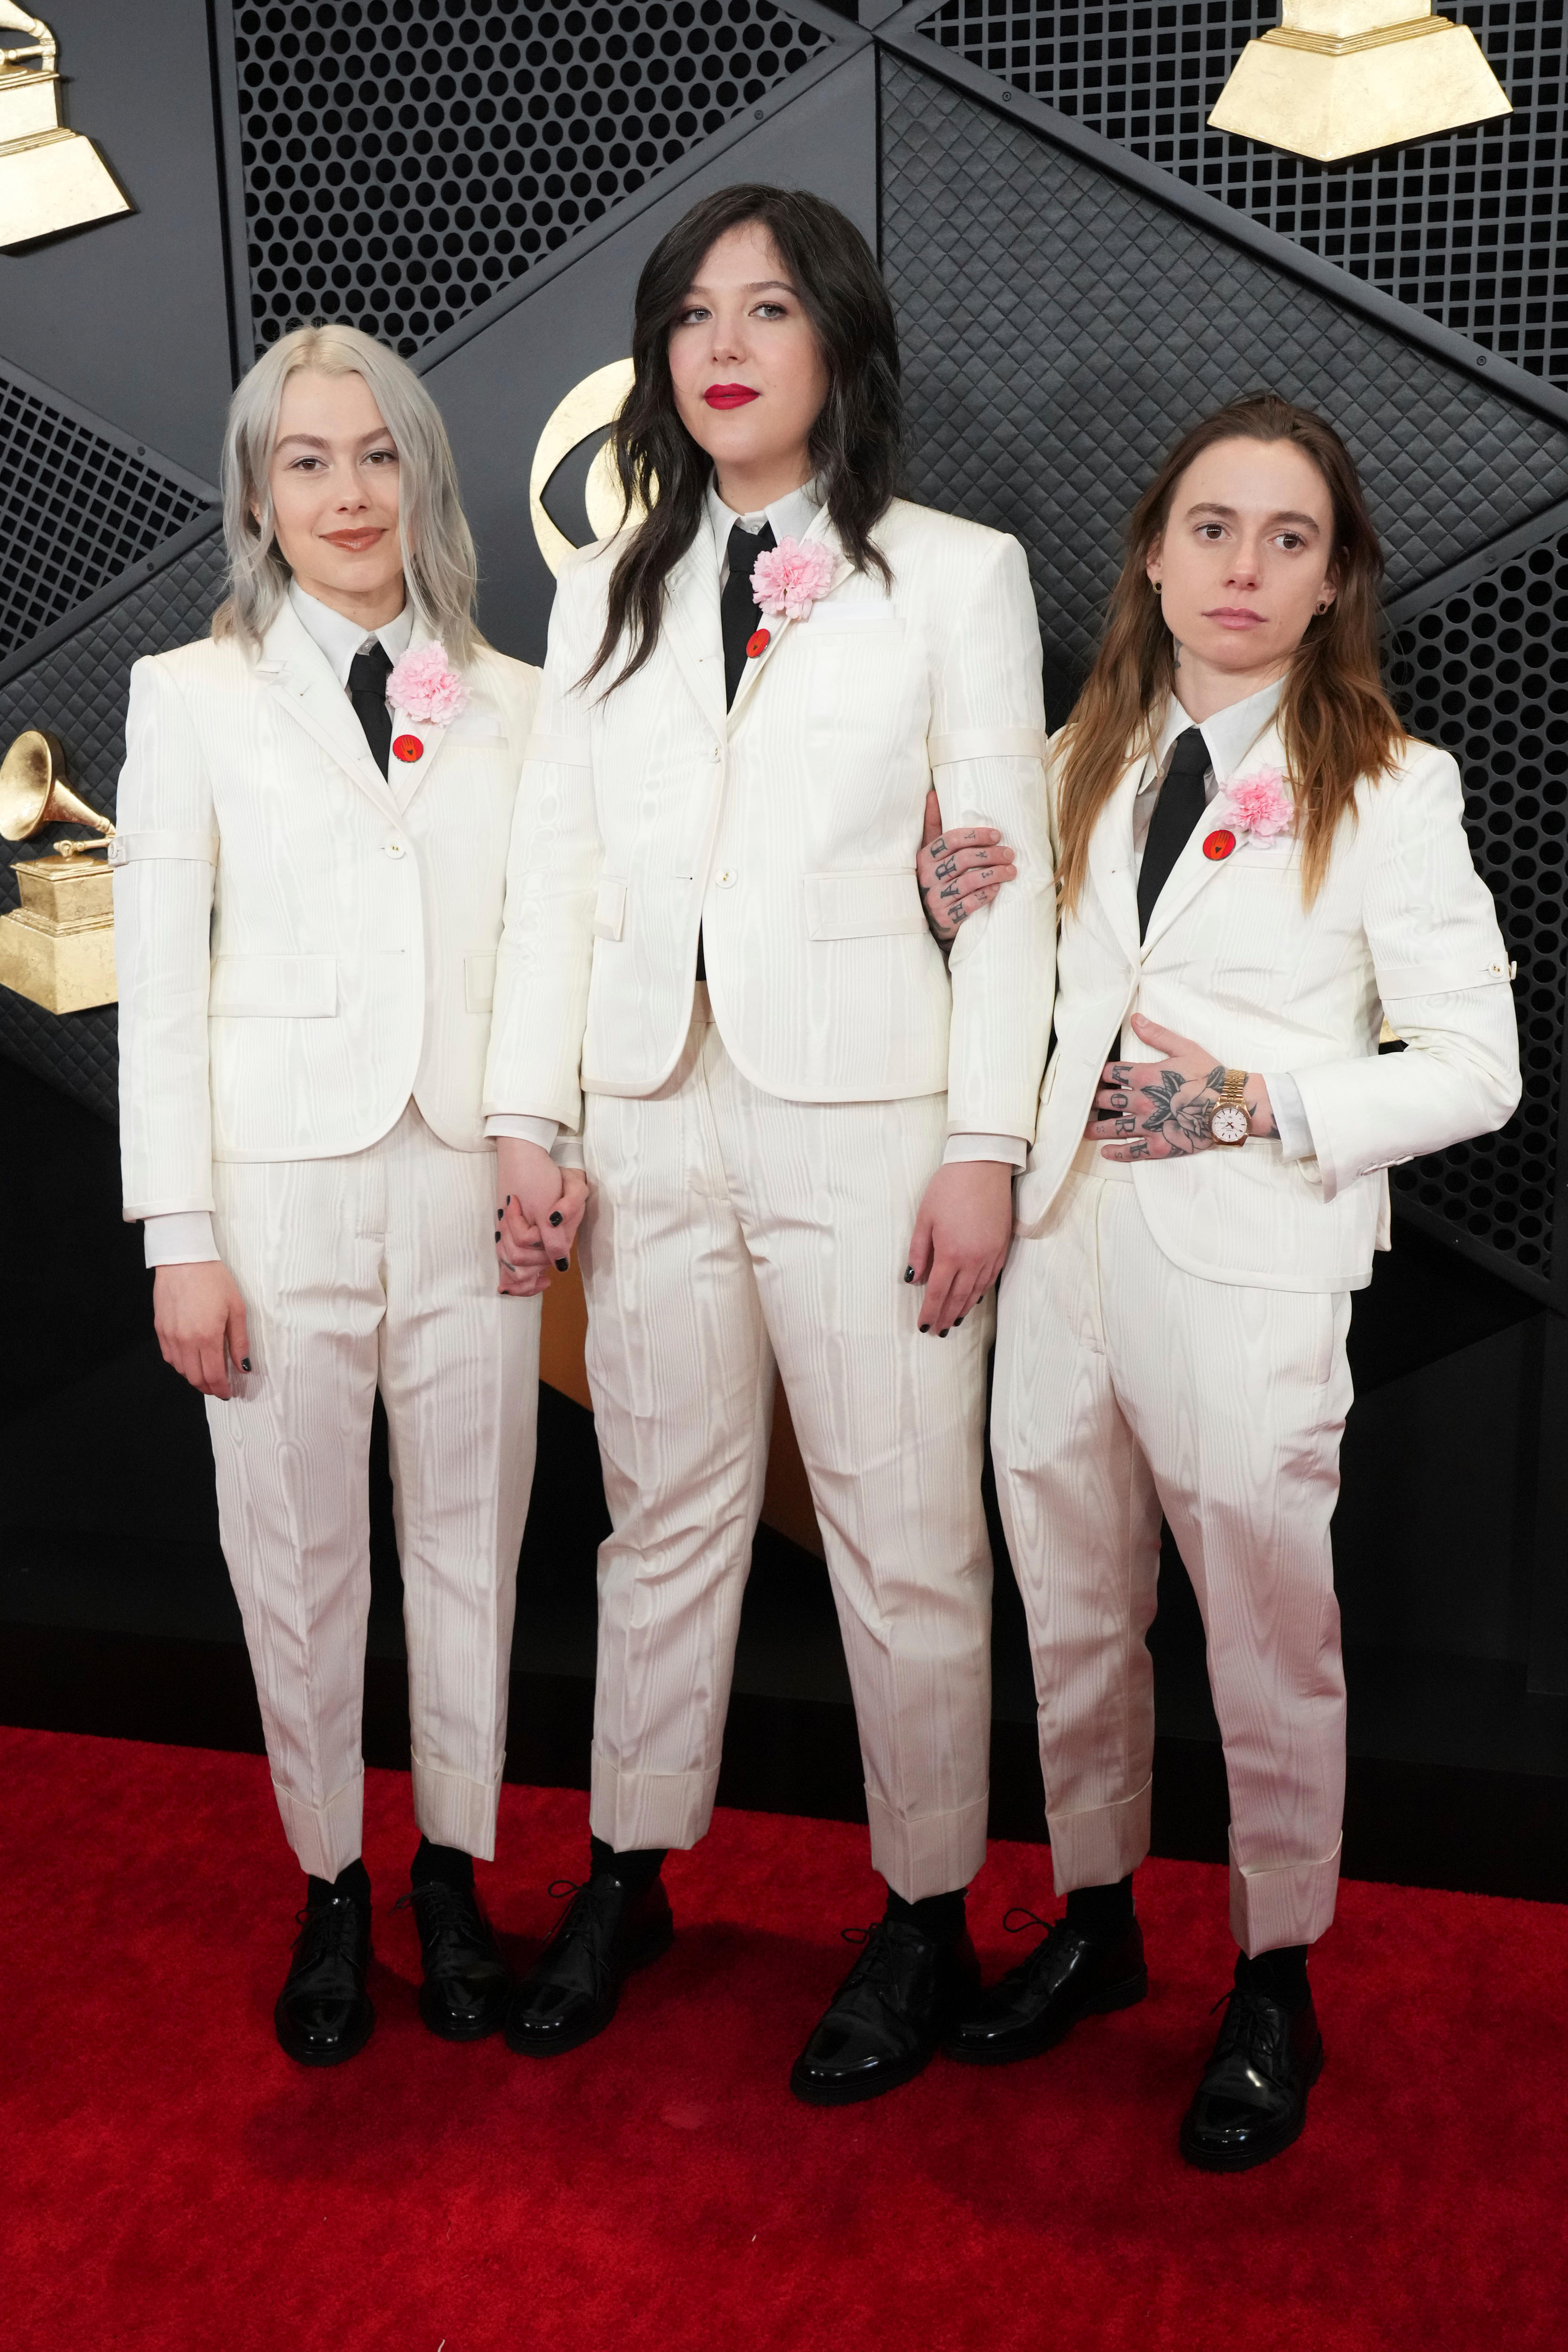 Phoebe Bridgers Lucy Dacus, and Julien Baker in white suits with black ties, each with a pink carnation and red dot on the lapel